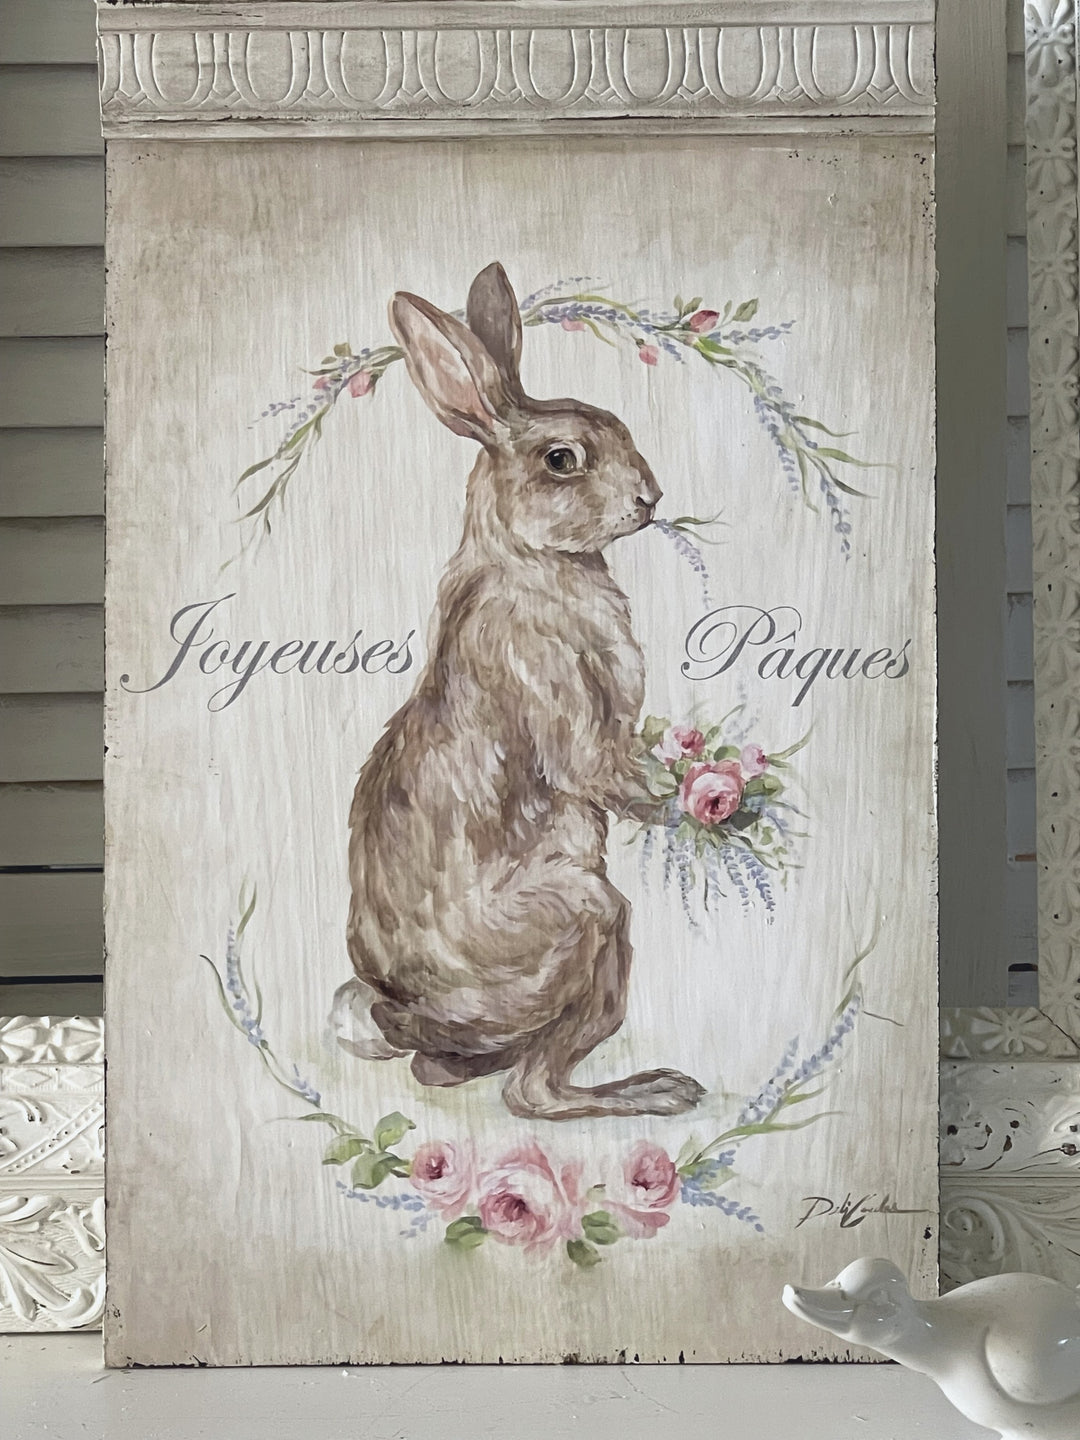 Shabby Chic French Saying Joyeuses Paques Happy Easter Wood Print by Debi Coules